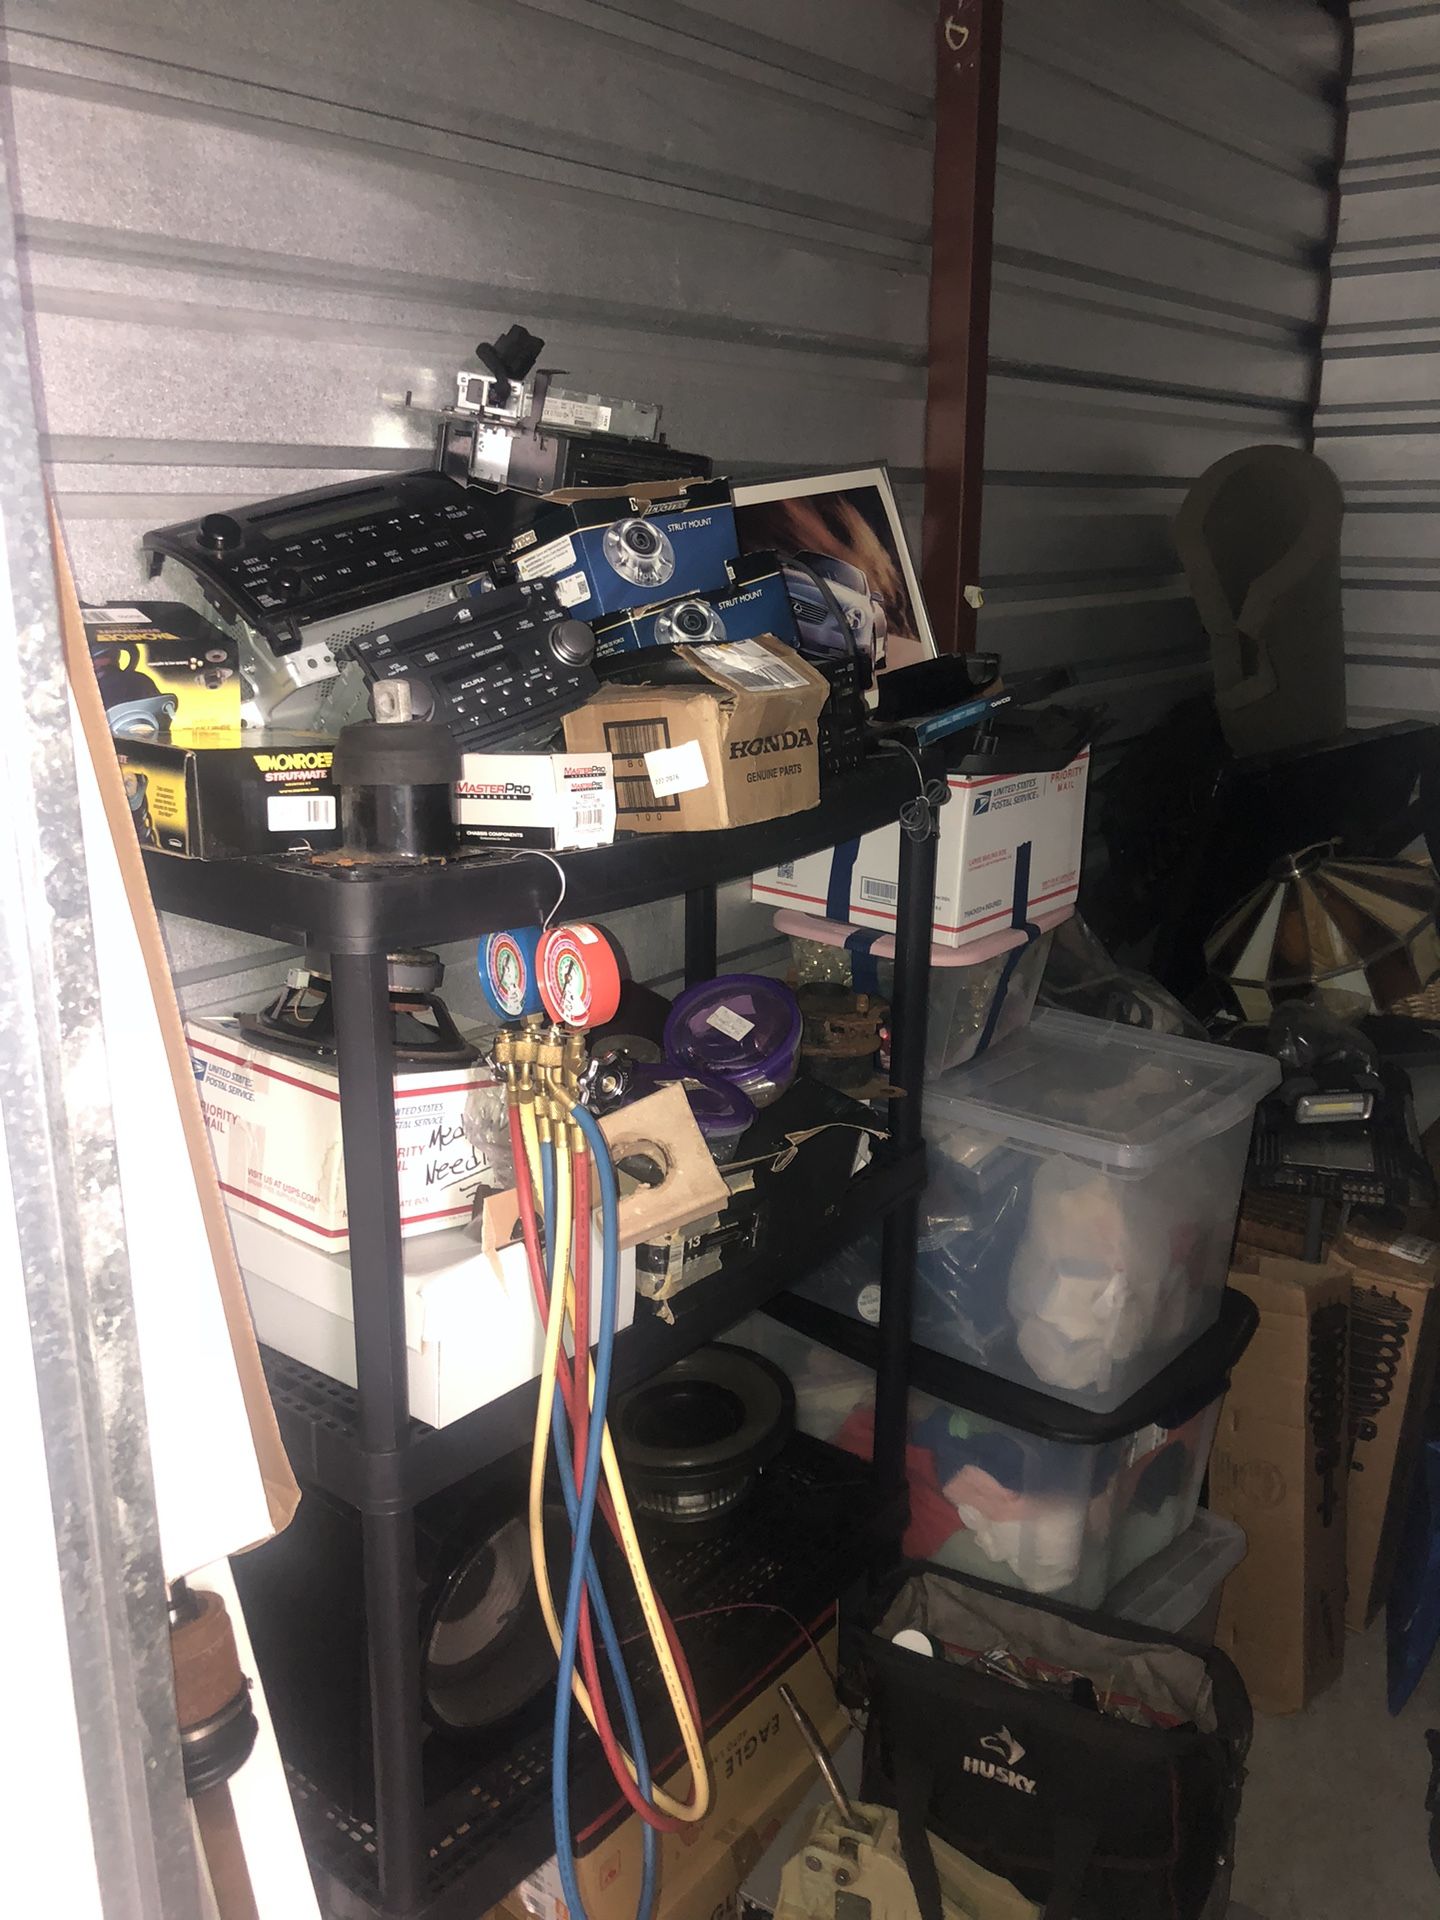 Need to clean out This Storage Unit ASAP